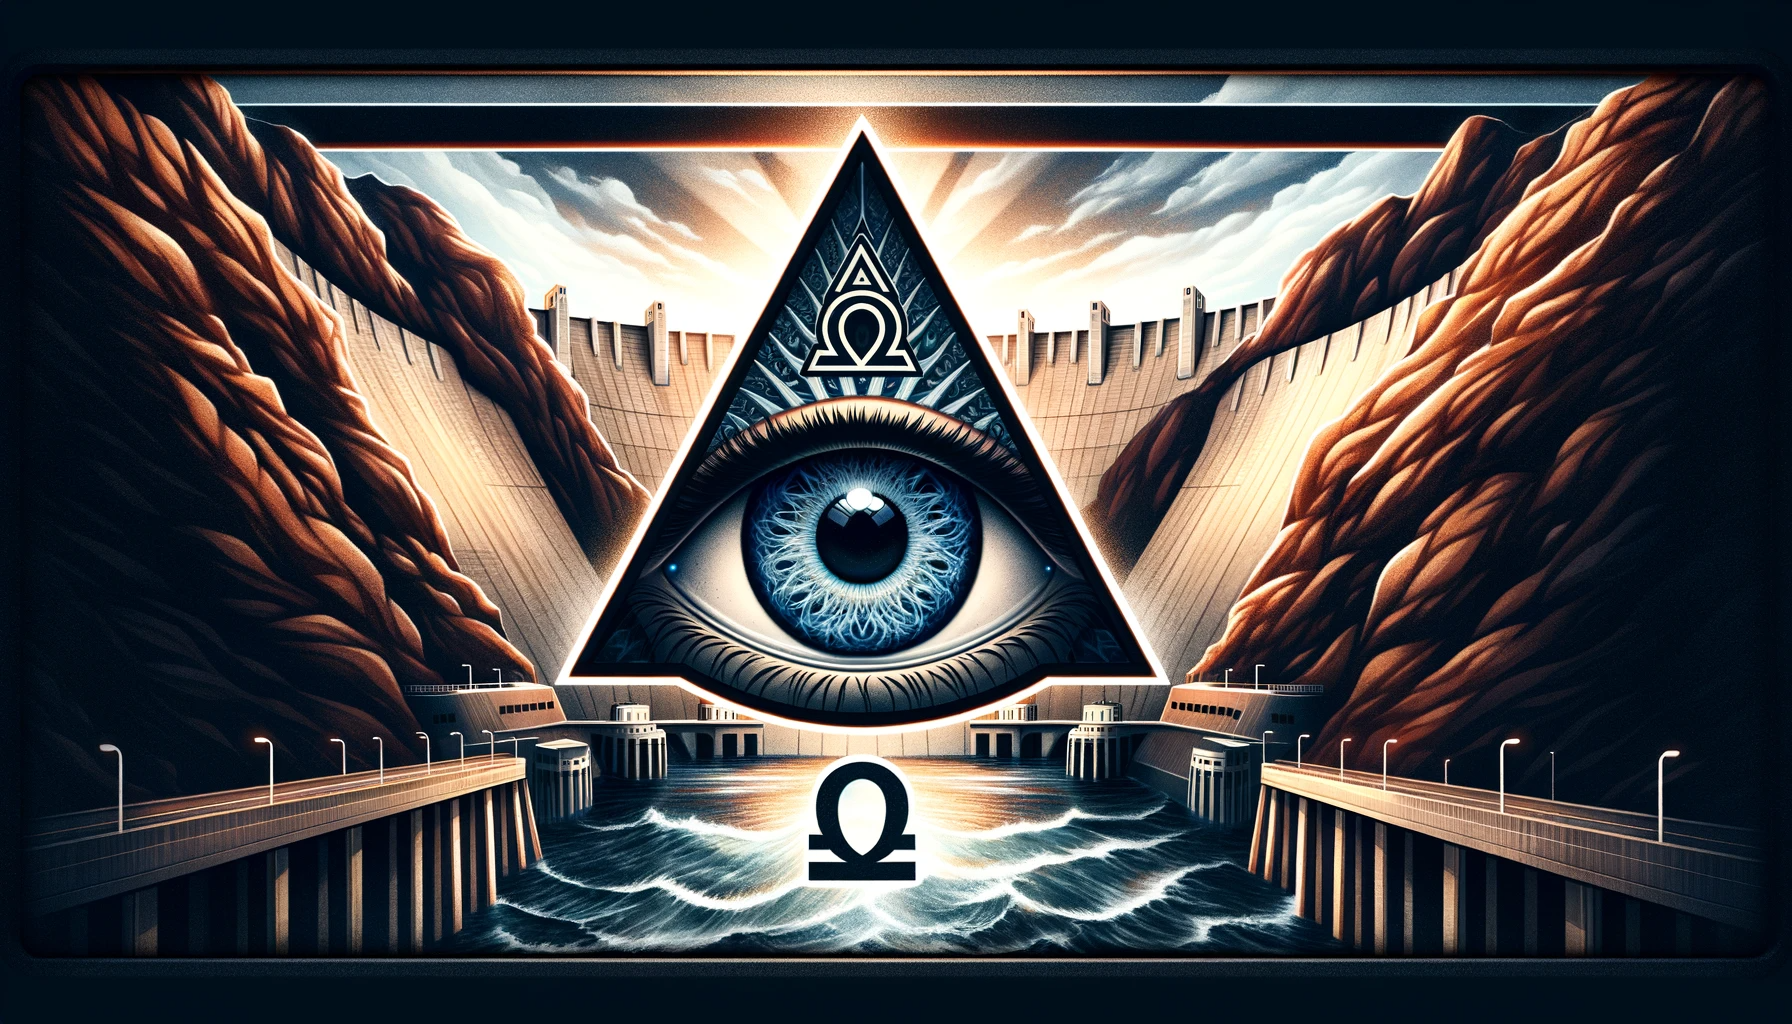 Dall·e 2023 11 07 19.39.46 An Image Designed As A Youtube Thumbnail Featuring An All Seeing Eye Prominently In The Center. Below The Eye Integrate An Omega Symbol. The Backgro -